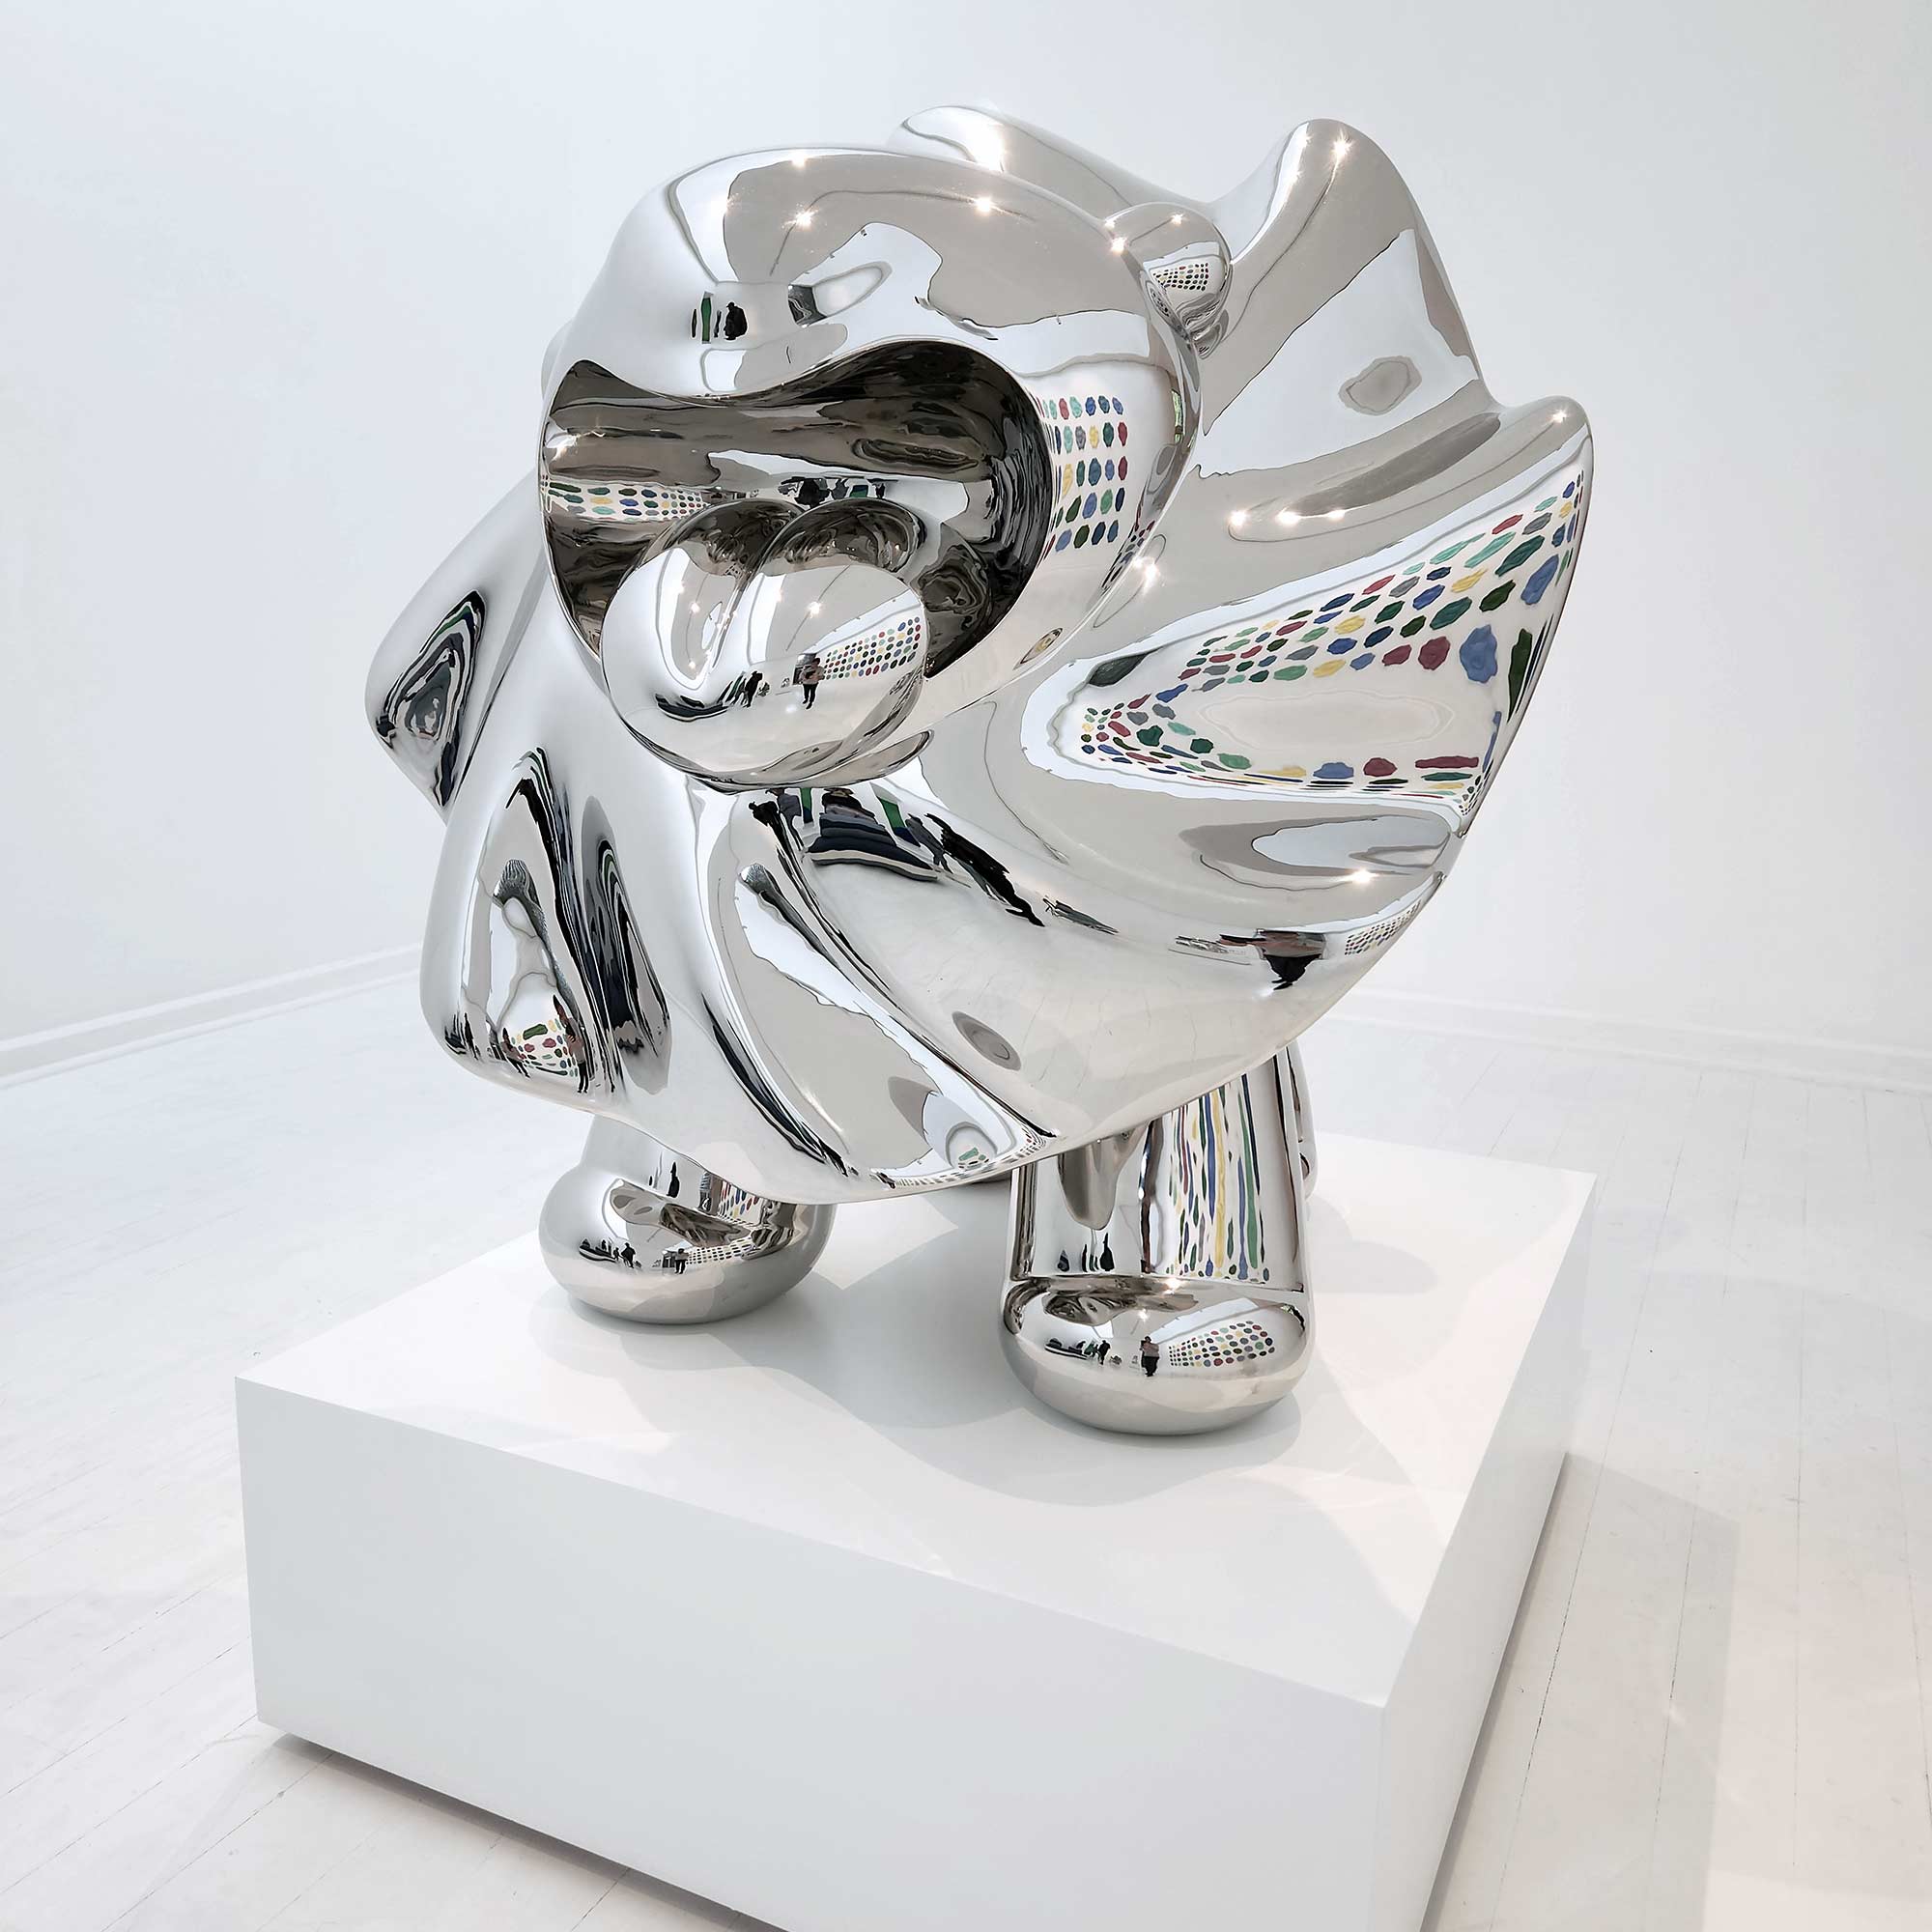 Lions breath polished stainless steel sculpture large size by Ferdi B Dick , hero view